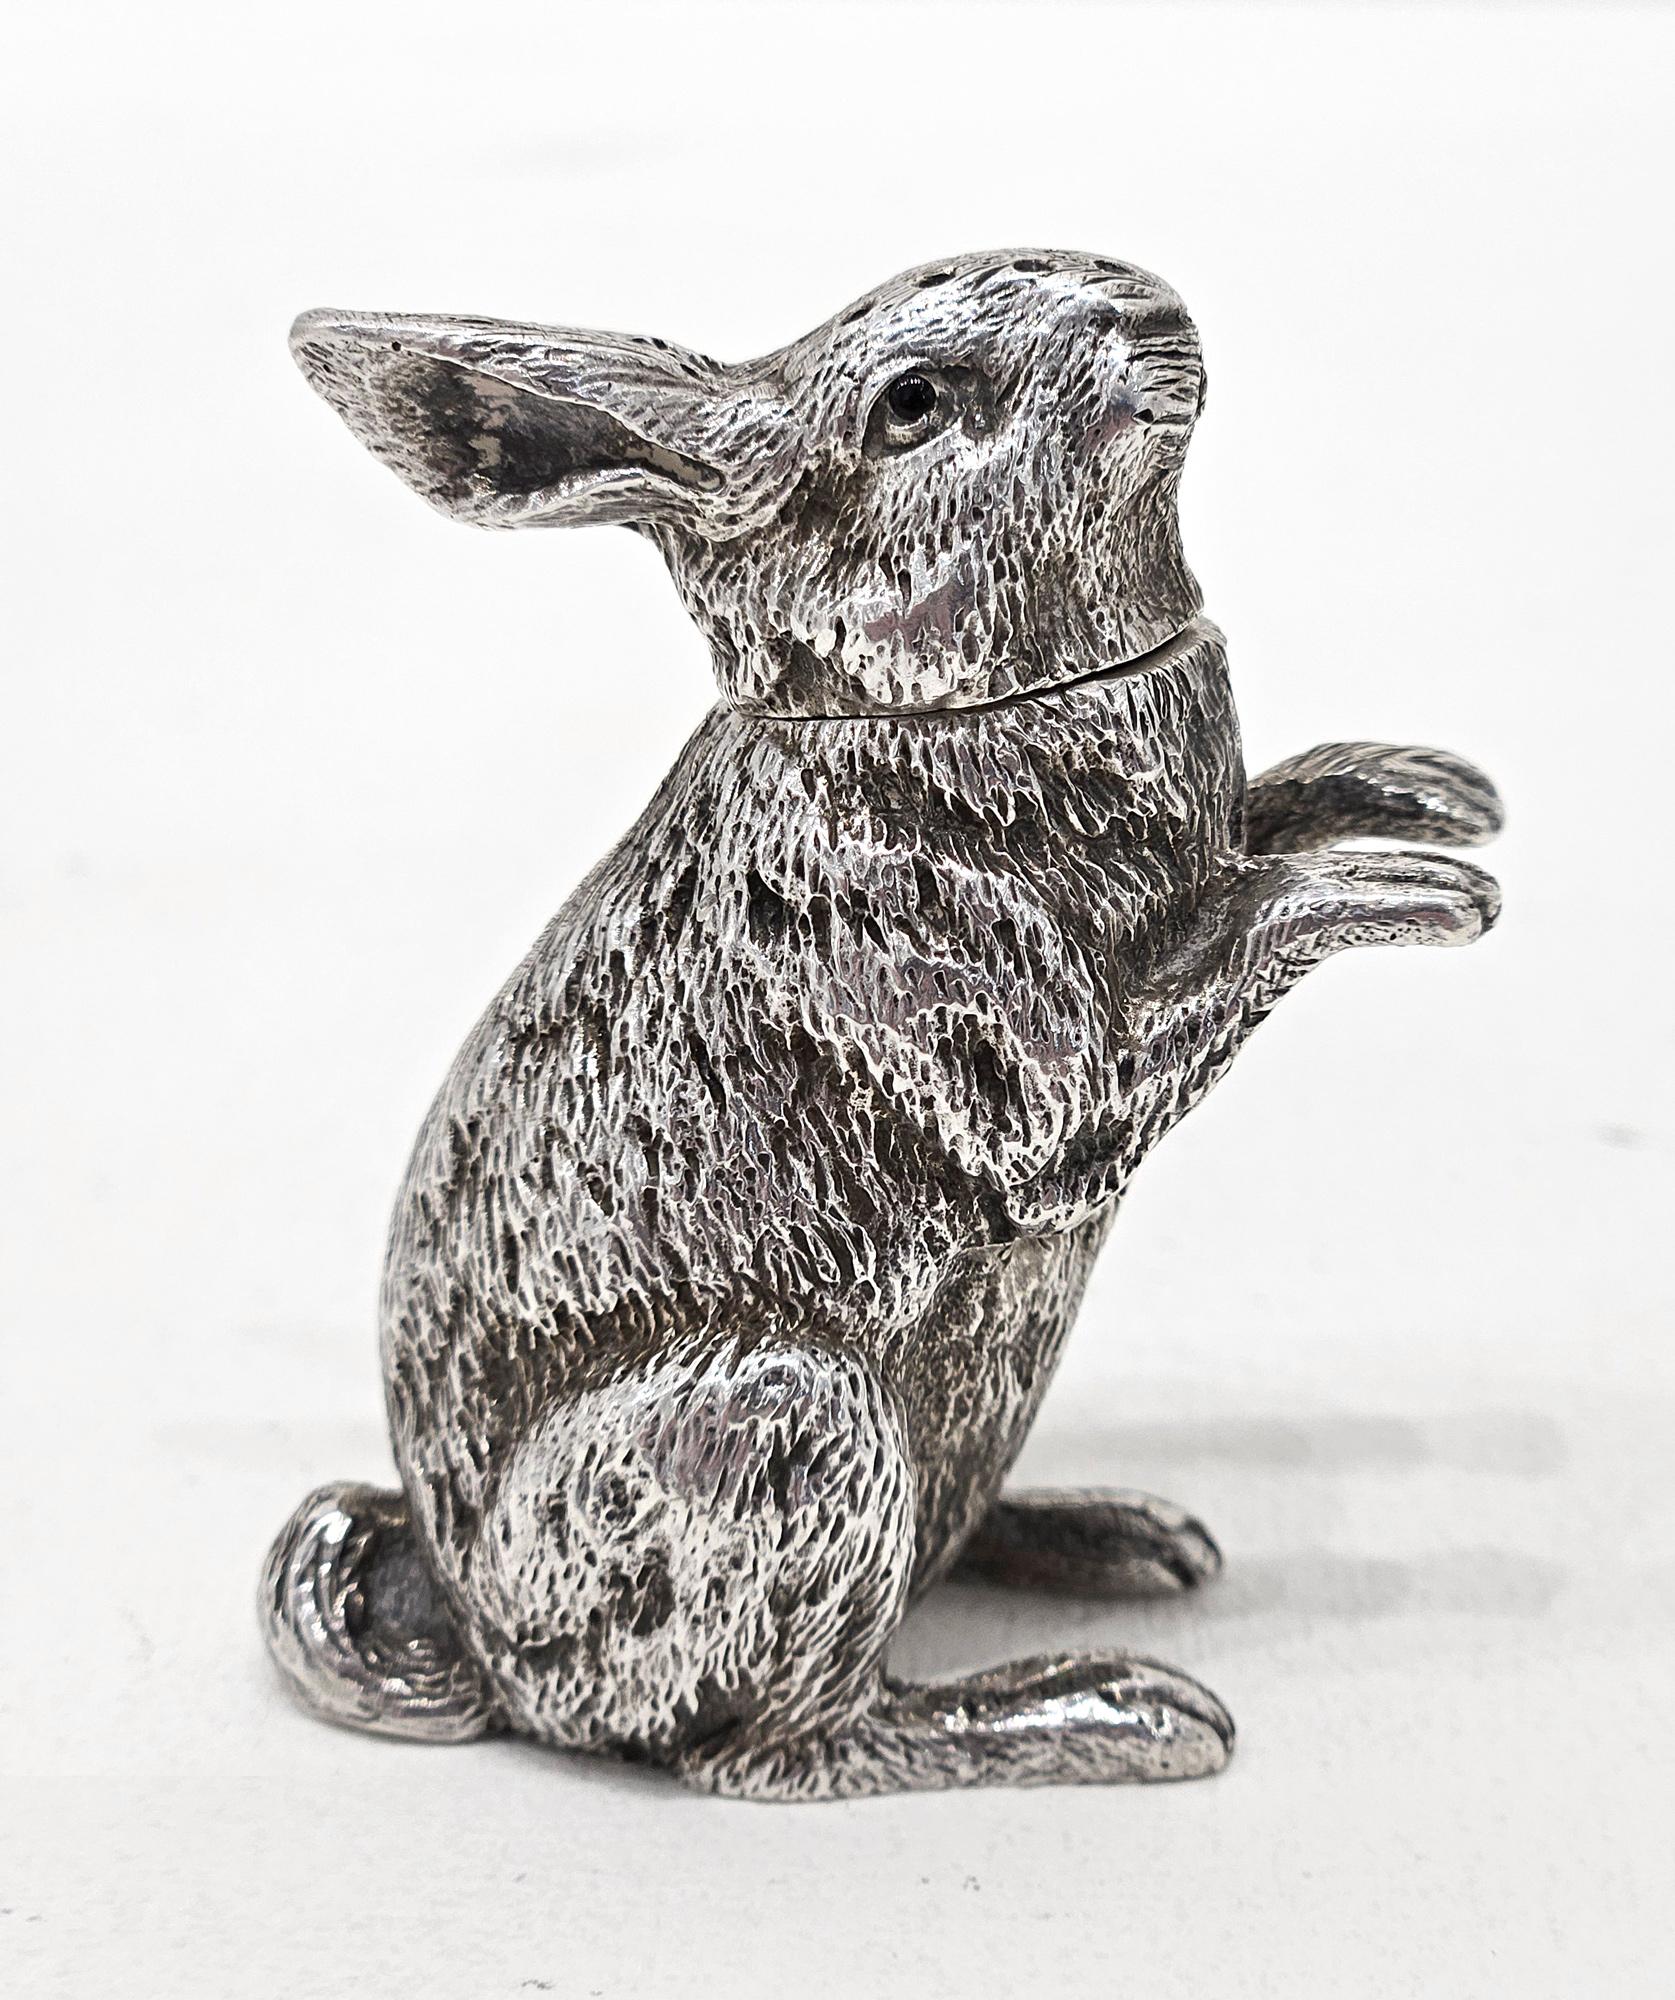 A late Victorian sterling silver pepperette in the form of a rabbit or hare, made by Sampson Mordan & Co of London in 1899. 

It is very finely modelled as a rabbit sitting up on its haunches with a removable head to be filled with pepper. This